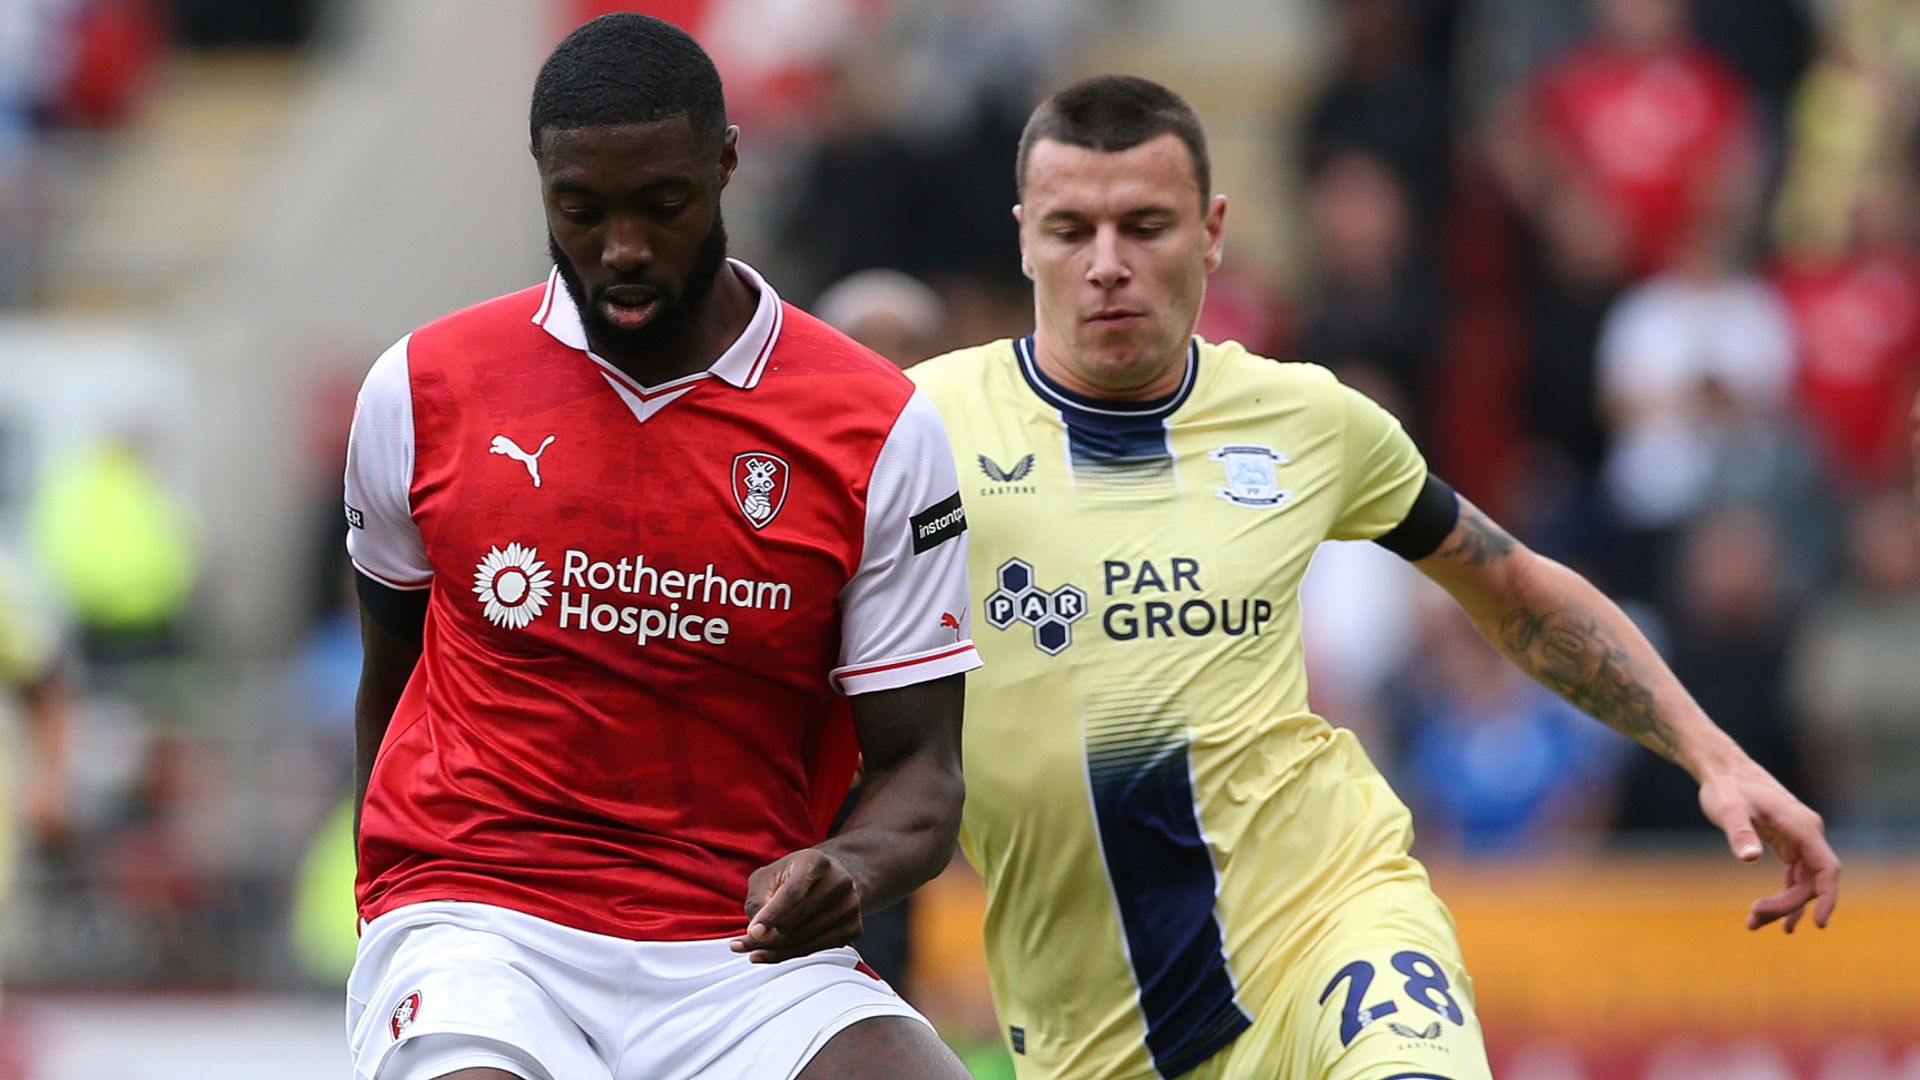 Preston knocked off top after win streak halted by Rotherham 